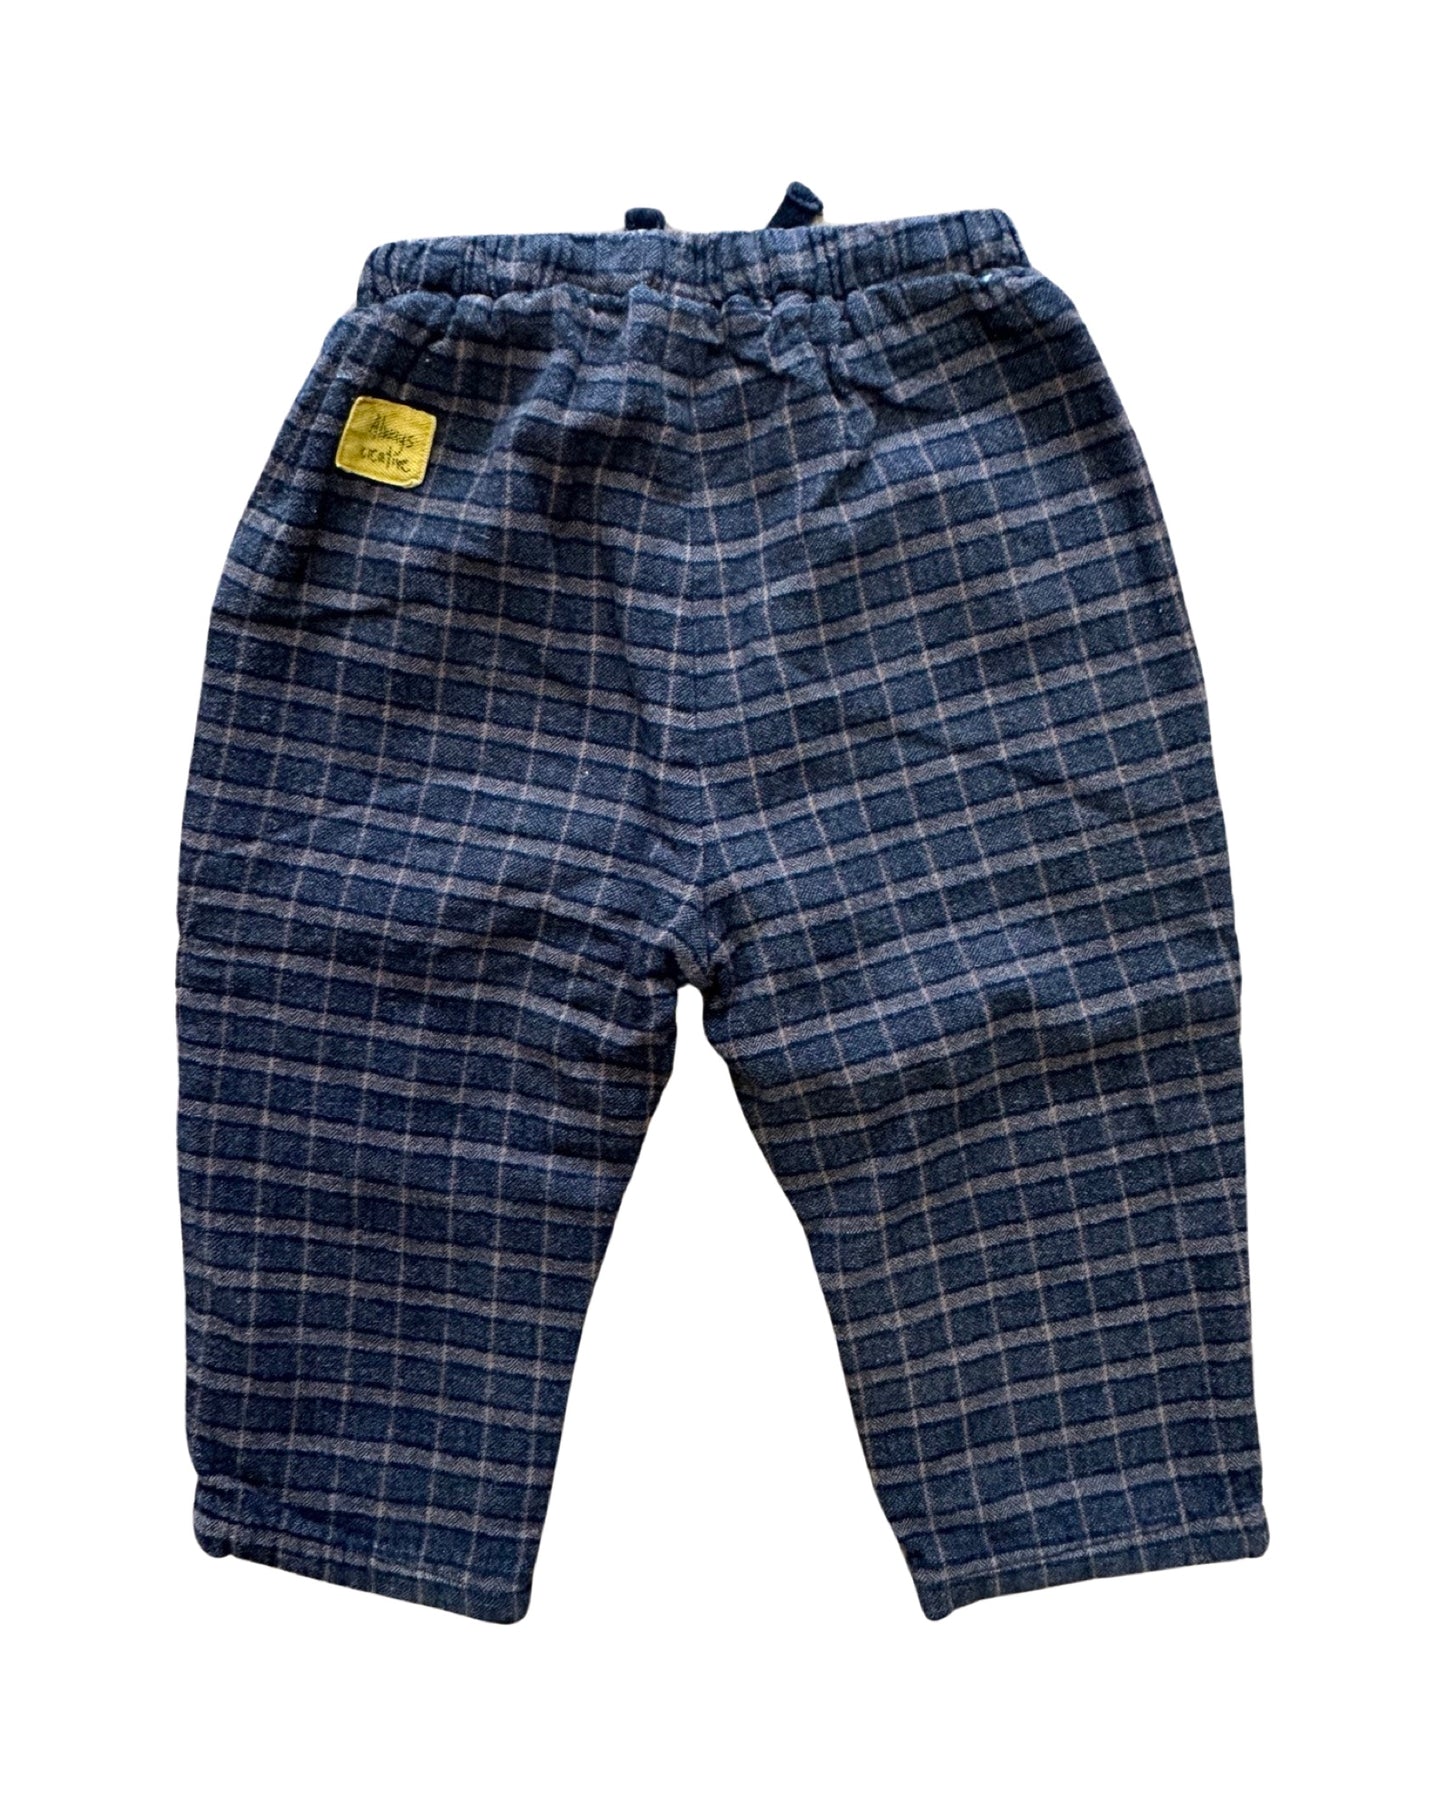 Baby Zara checked trousers (12-18mths)